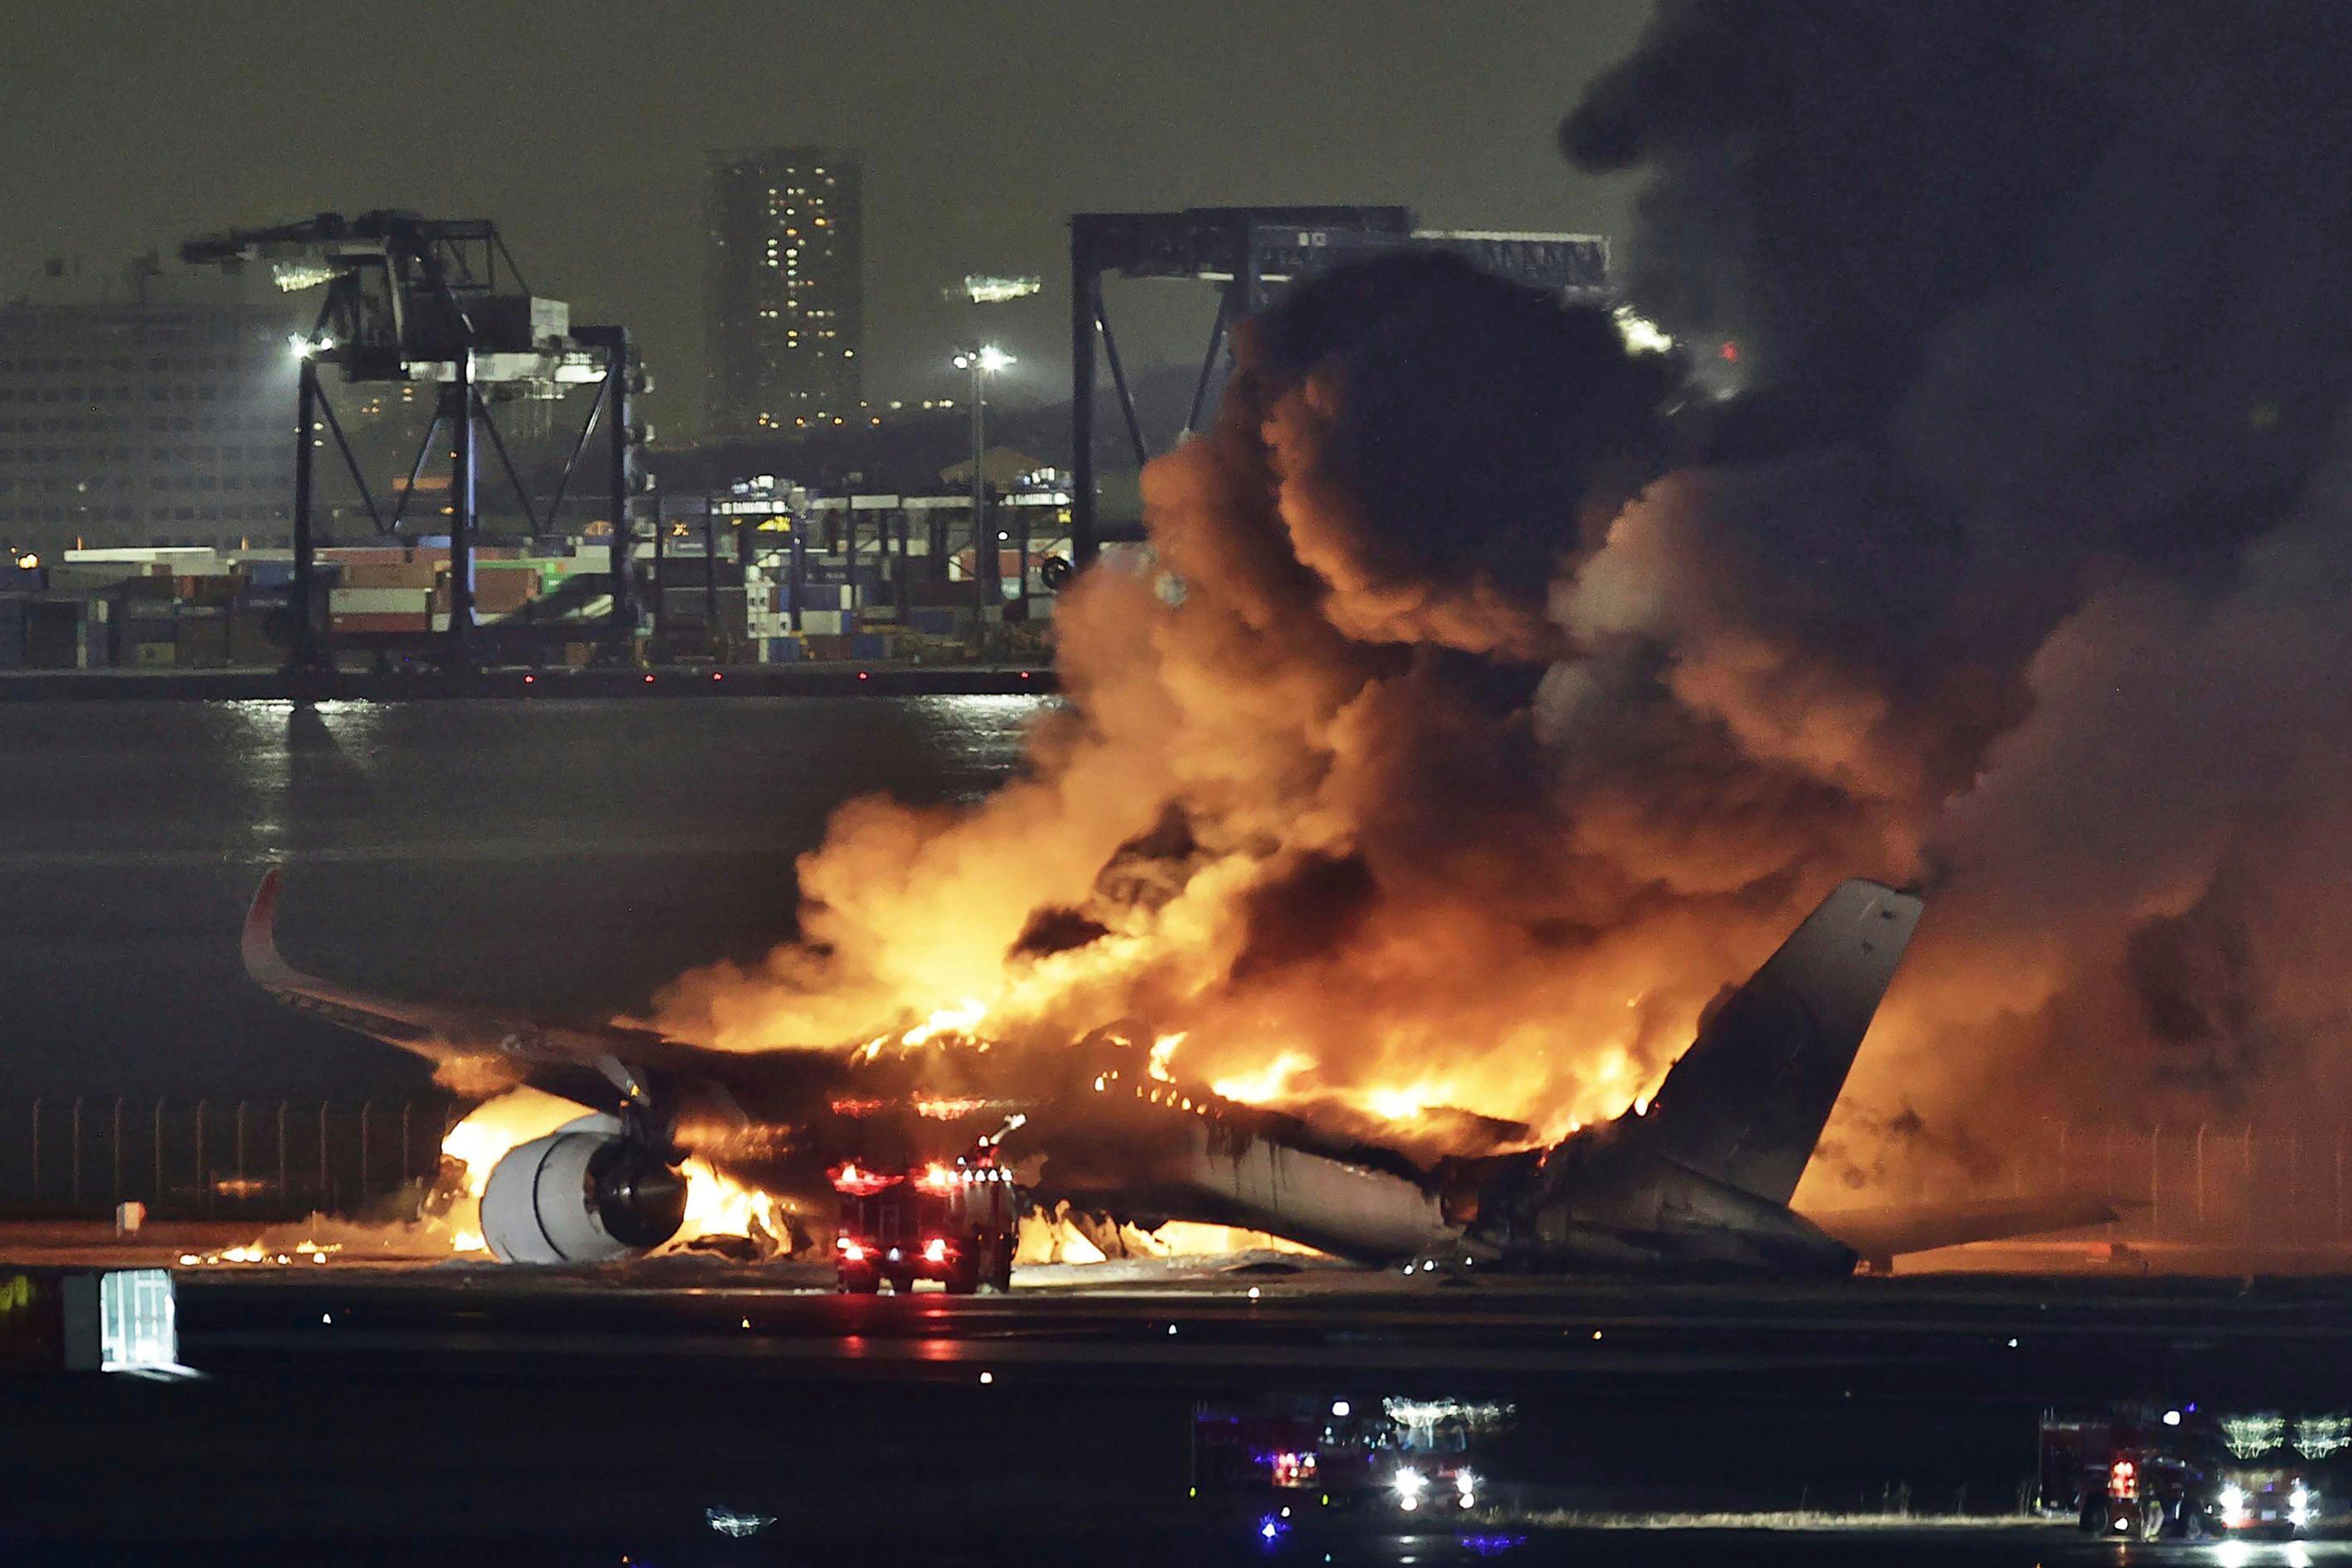 On January 2nd, a fatal plane collision also at Tokyo’s Haneda Airport left five people dead